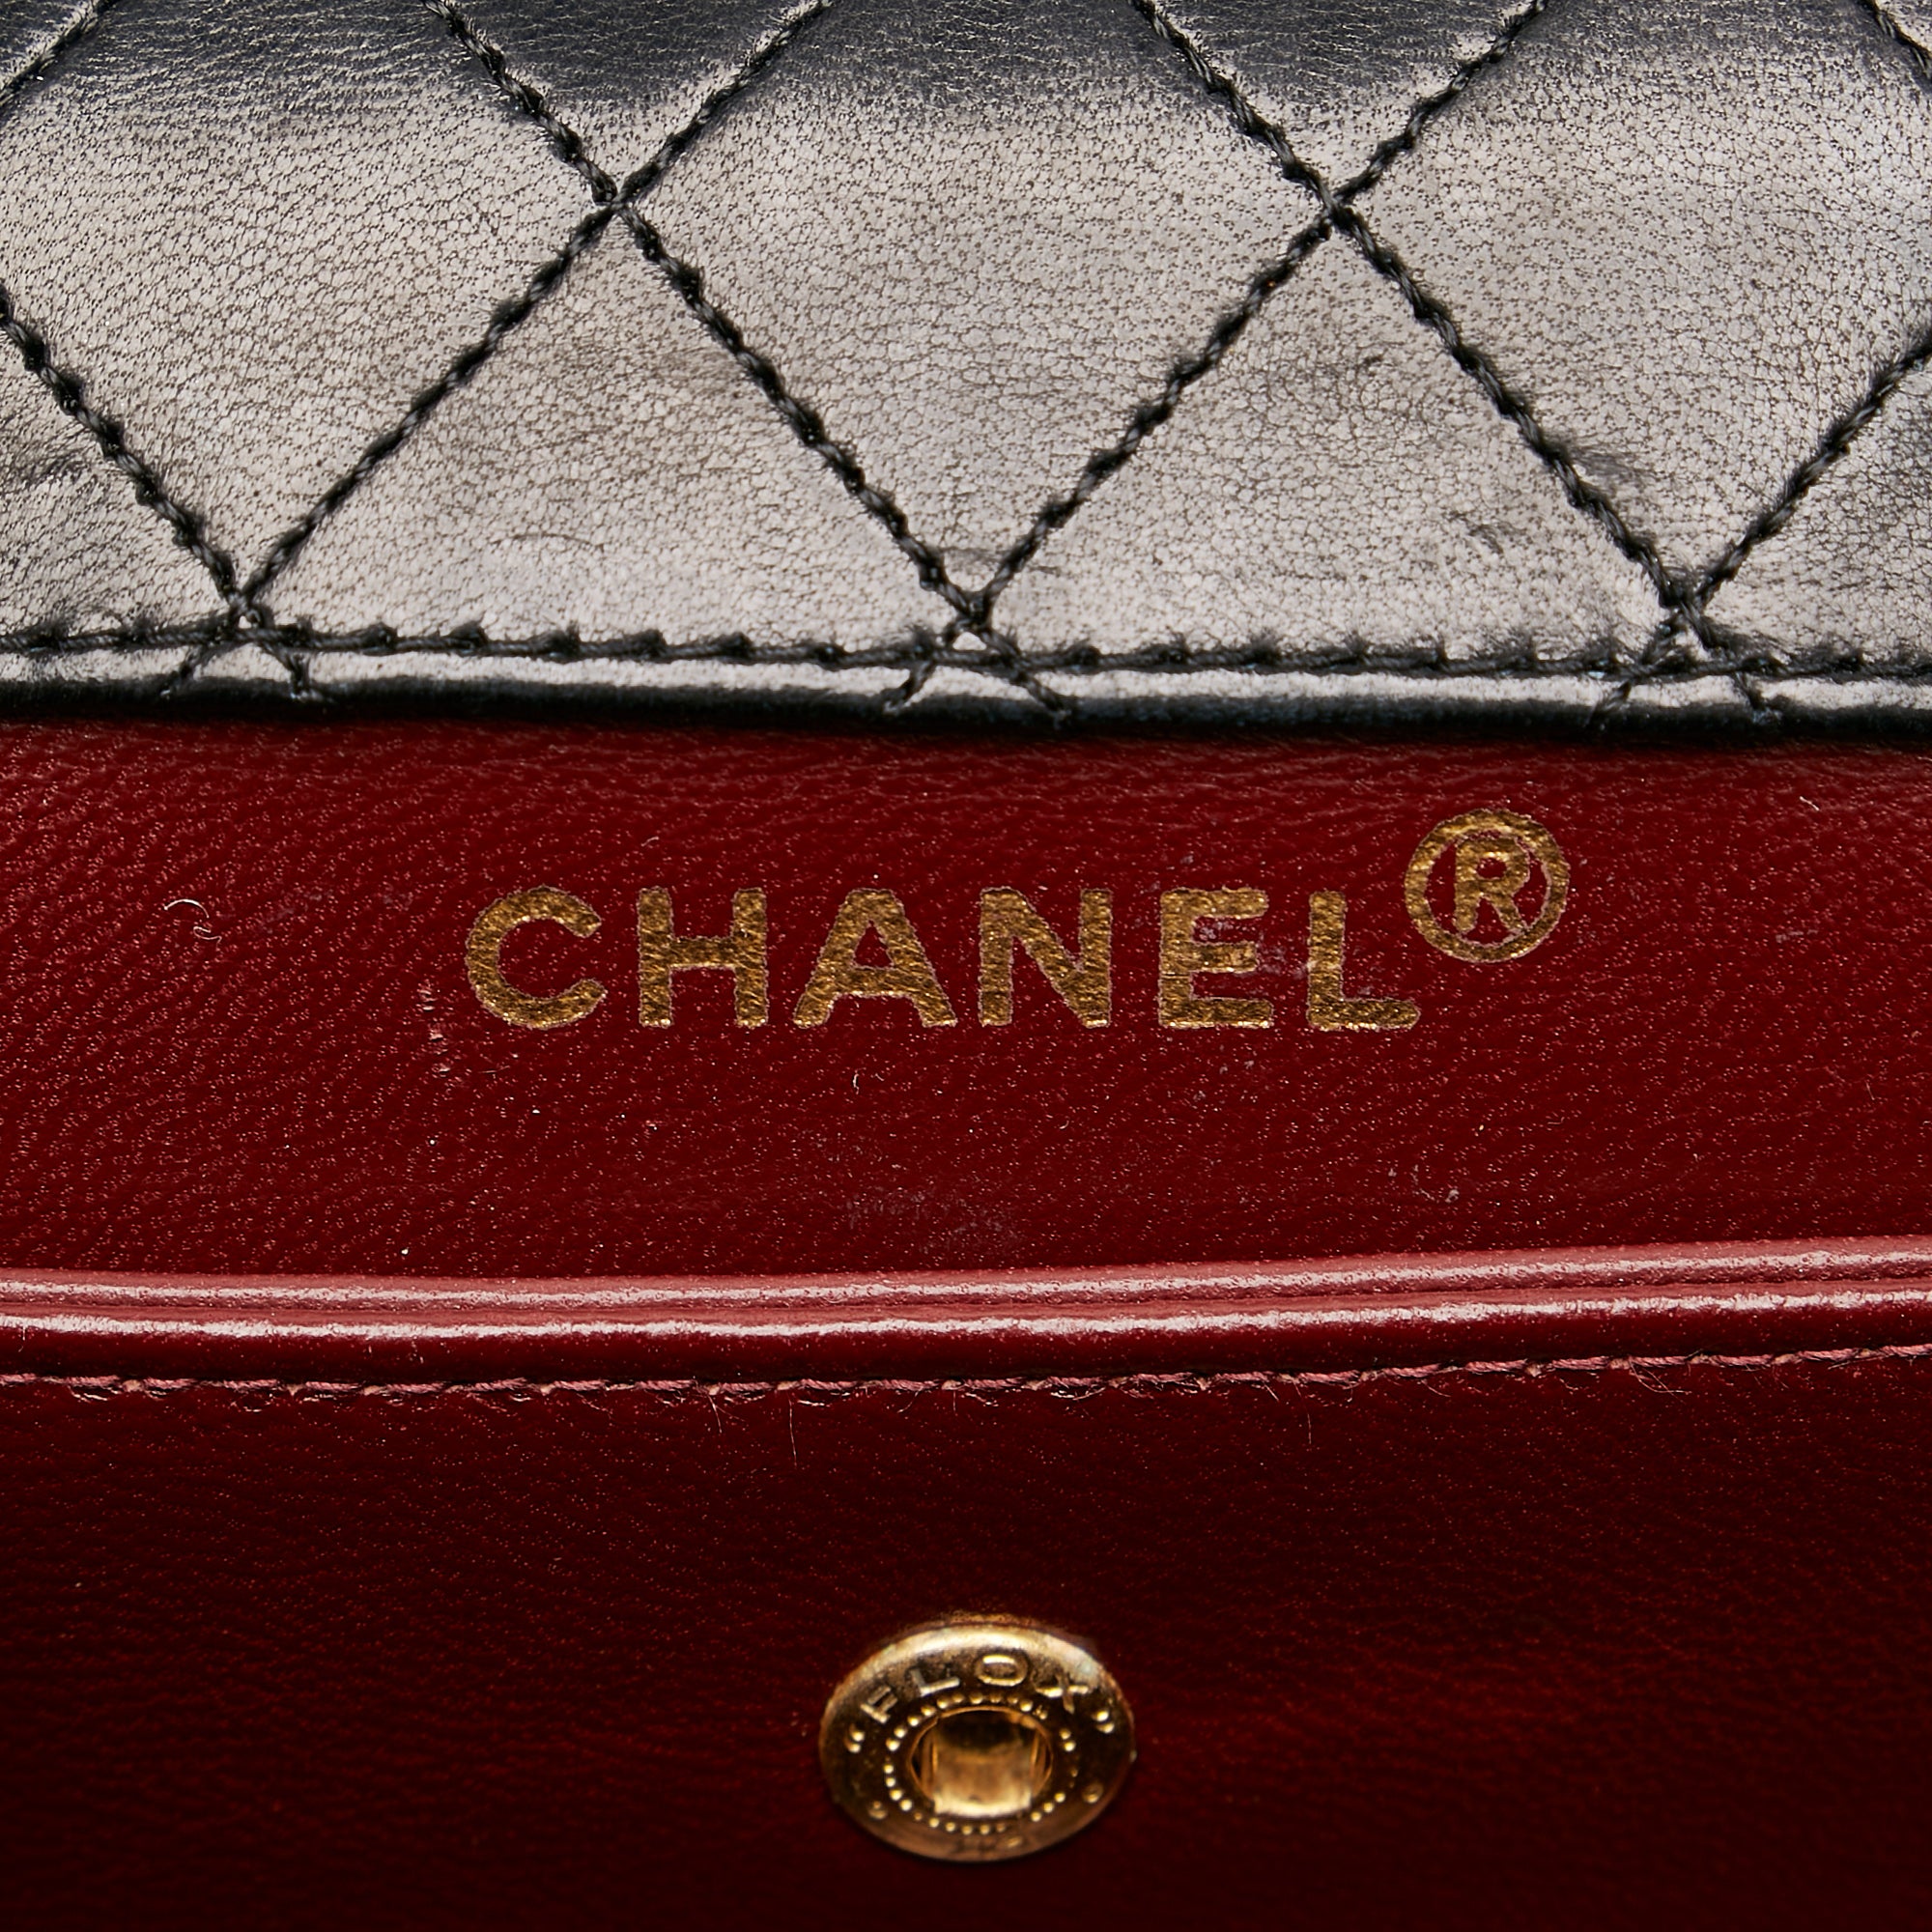 Vintage Chanel Quilted Matelasse CC Logo Lambskin Trapezoid